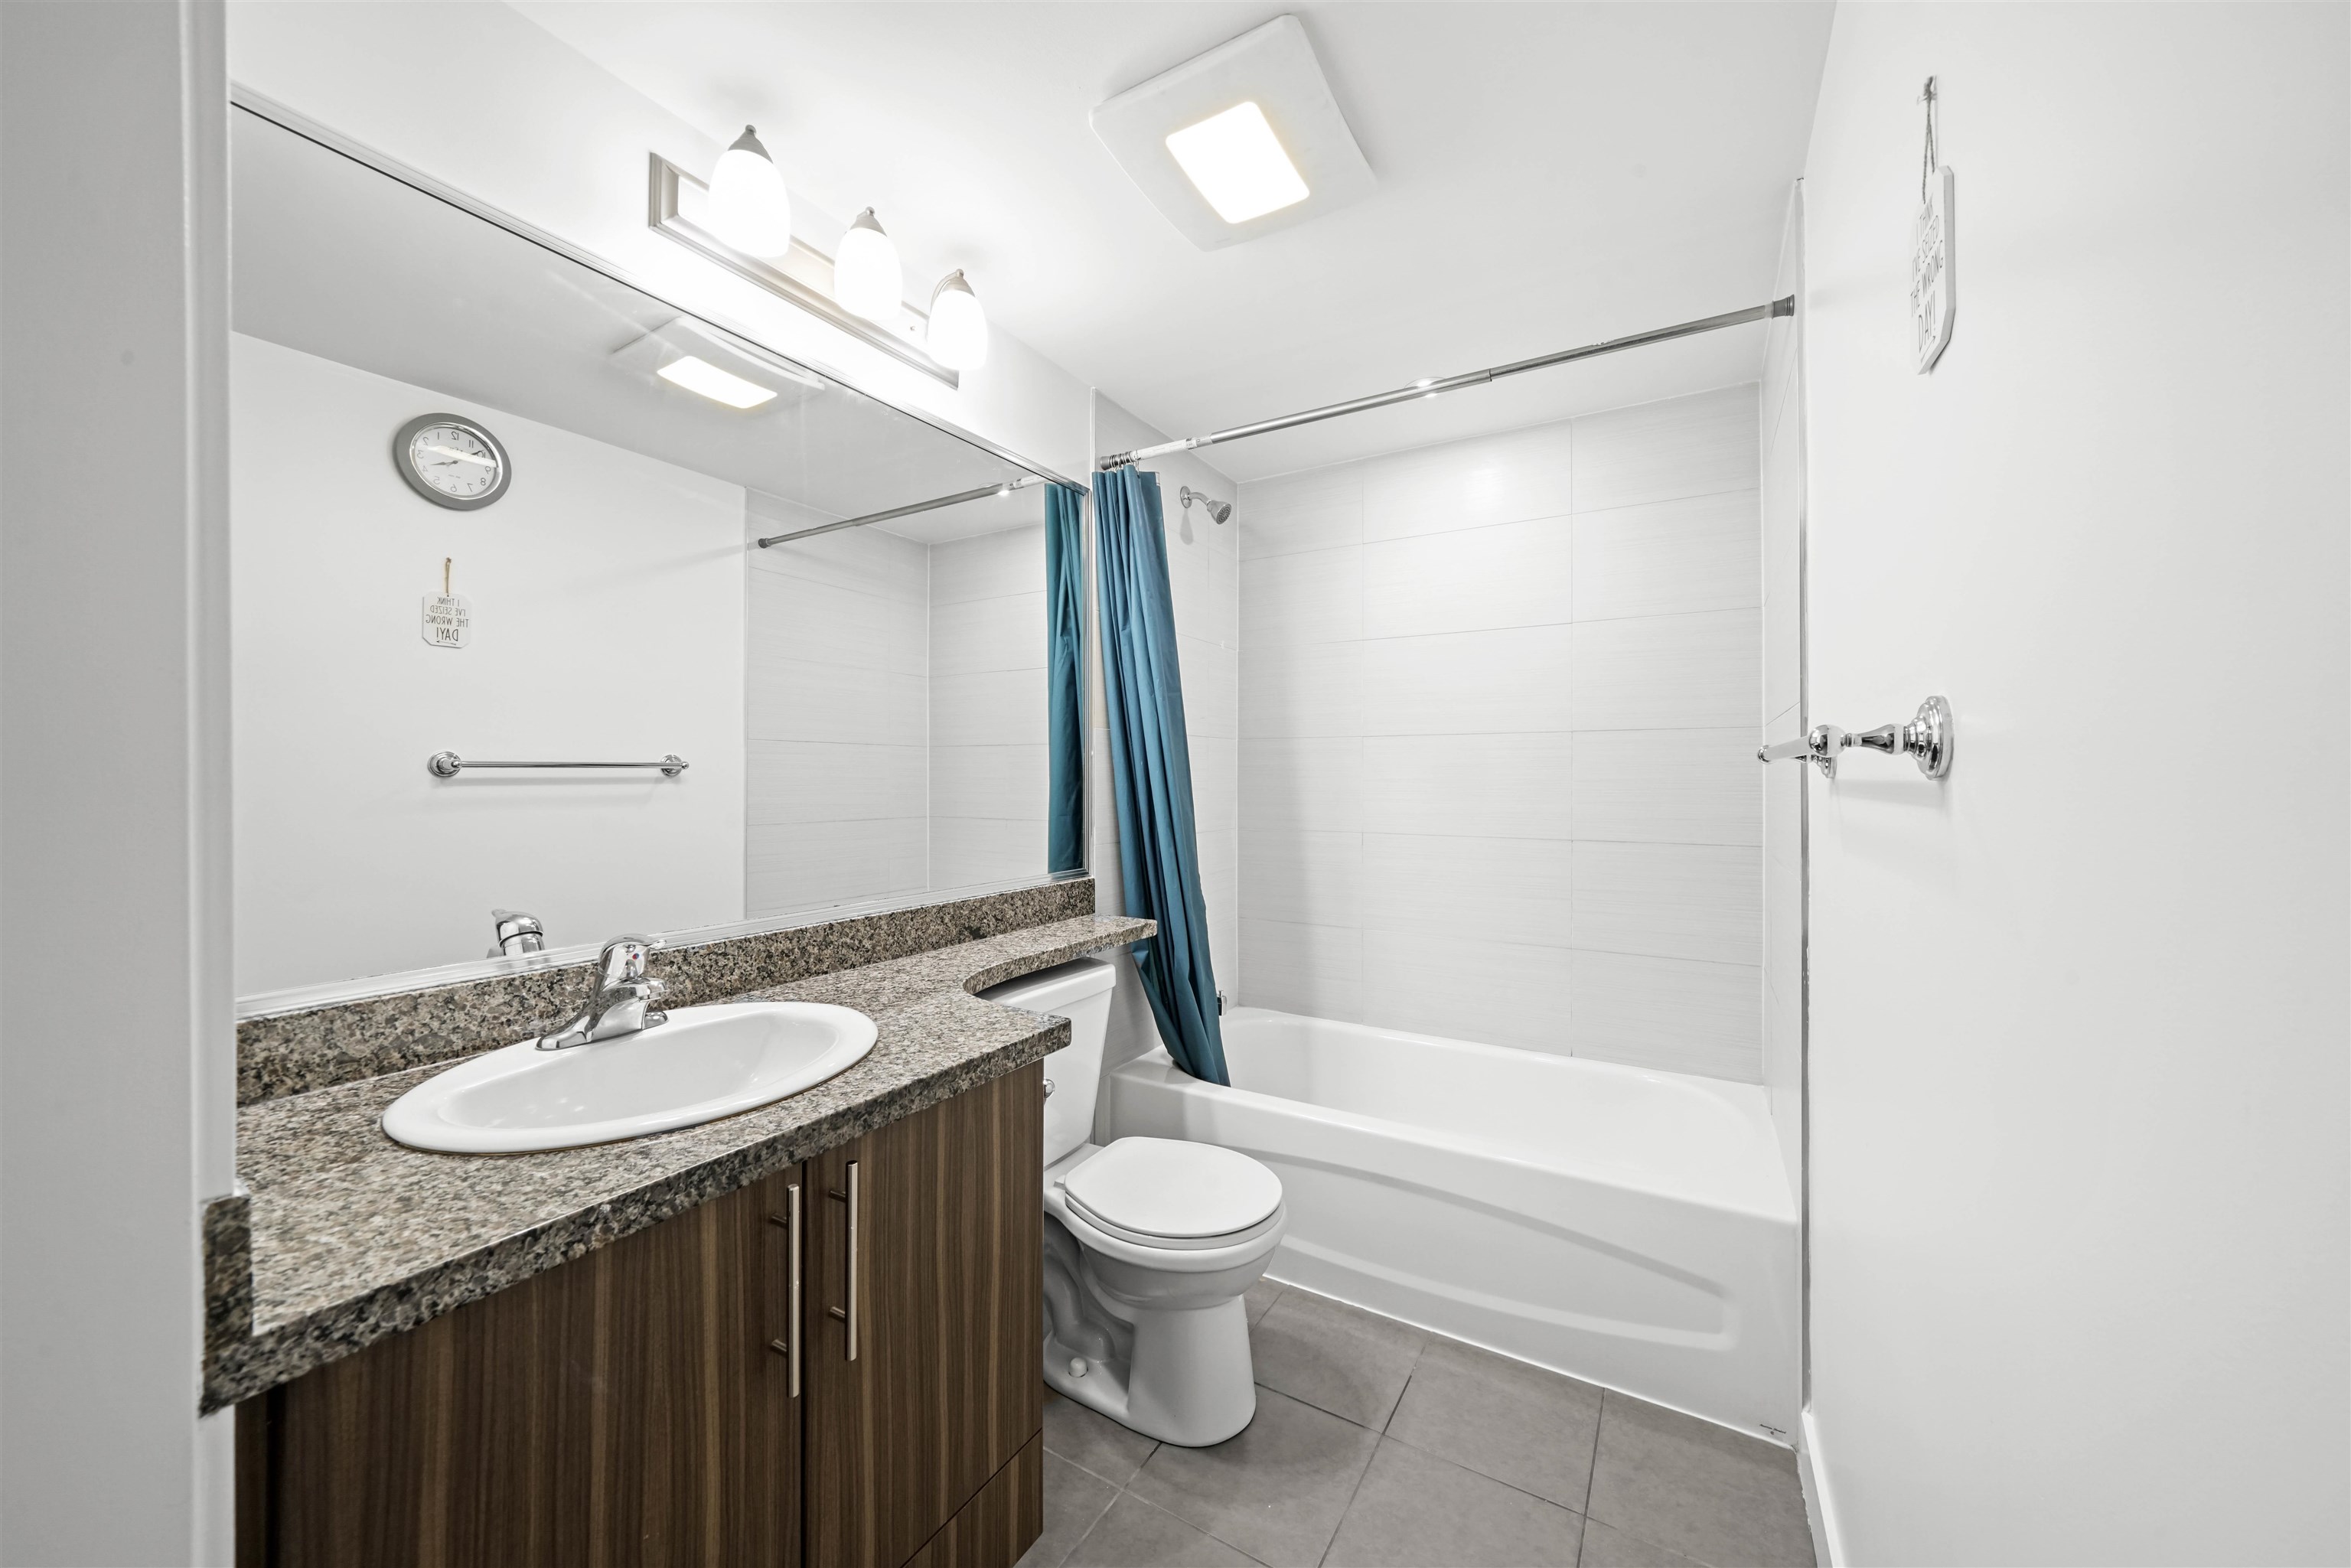 1239 KINGSWAY, Vancouver, British Columbia V5V 3E2, 2 Bedrooms Bedrooms, ,1 BathroomBathrooms,Residential Attached,For Sale,KINGSWAY,R2740593